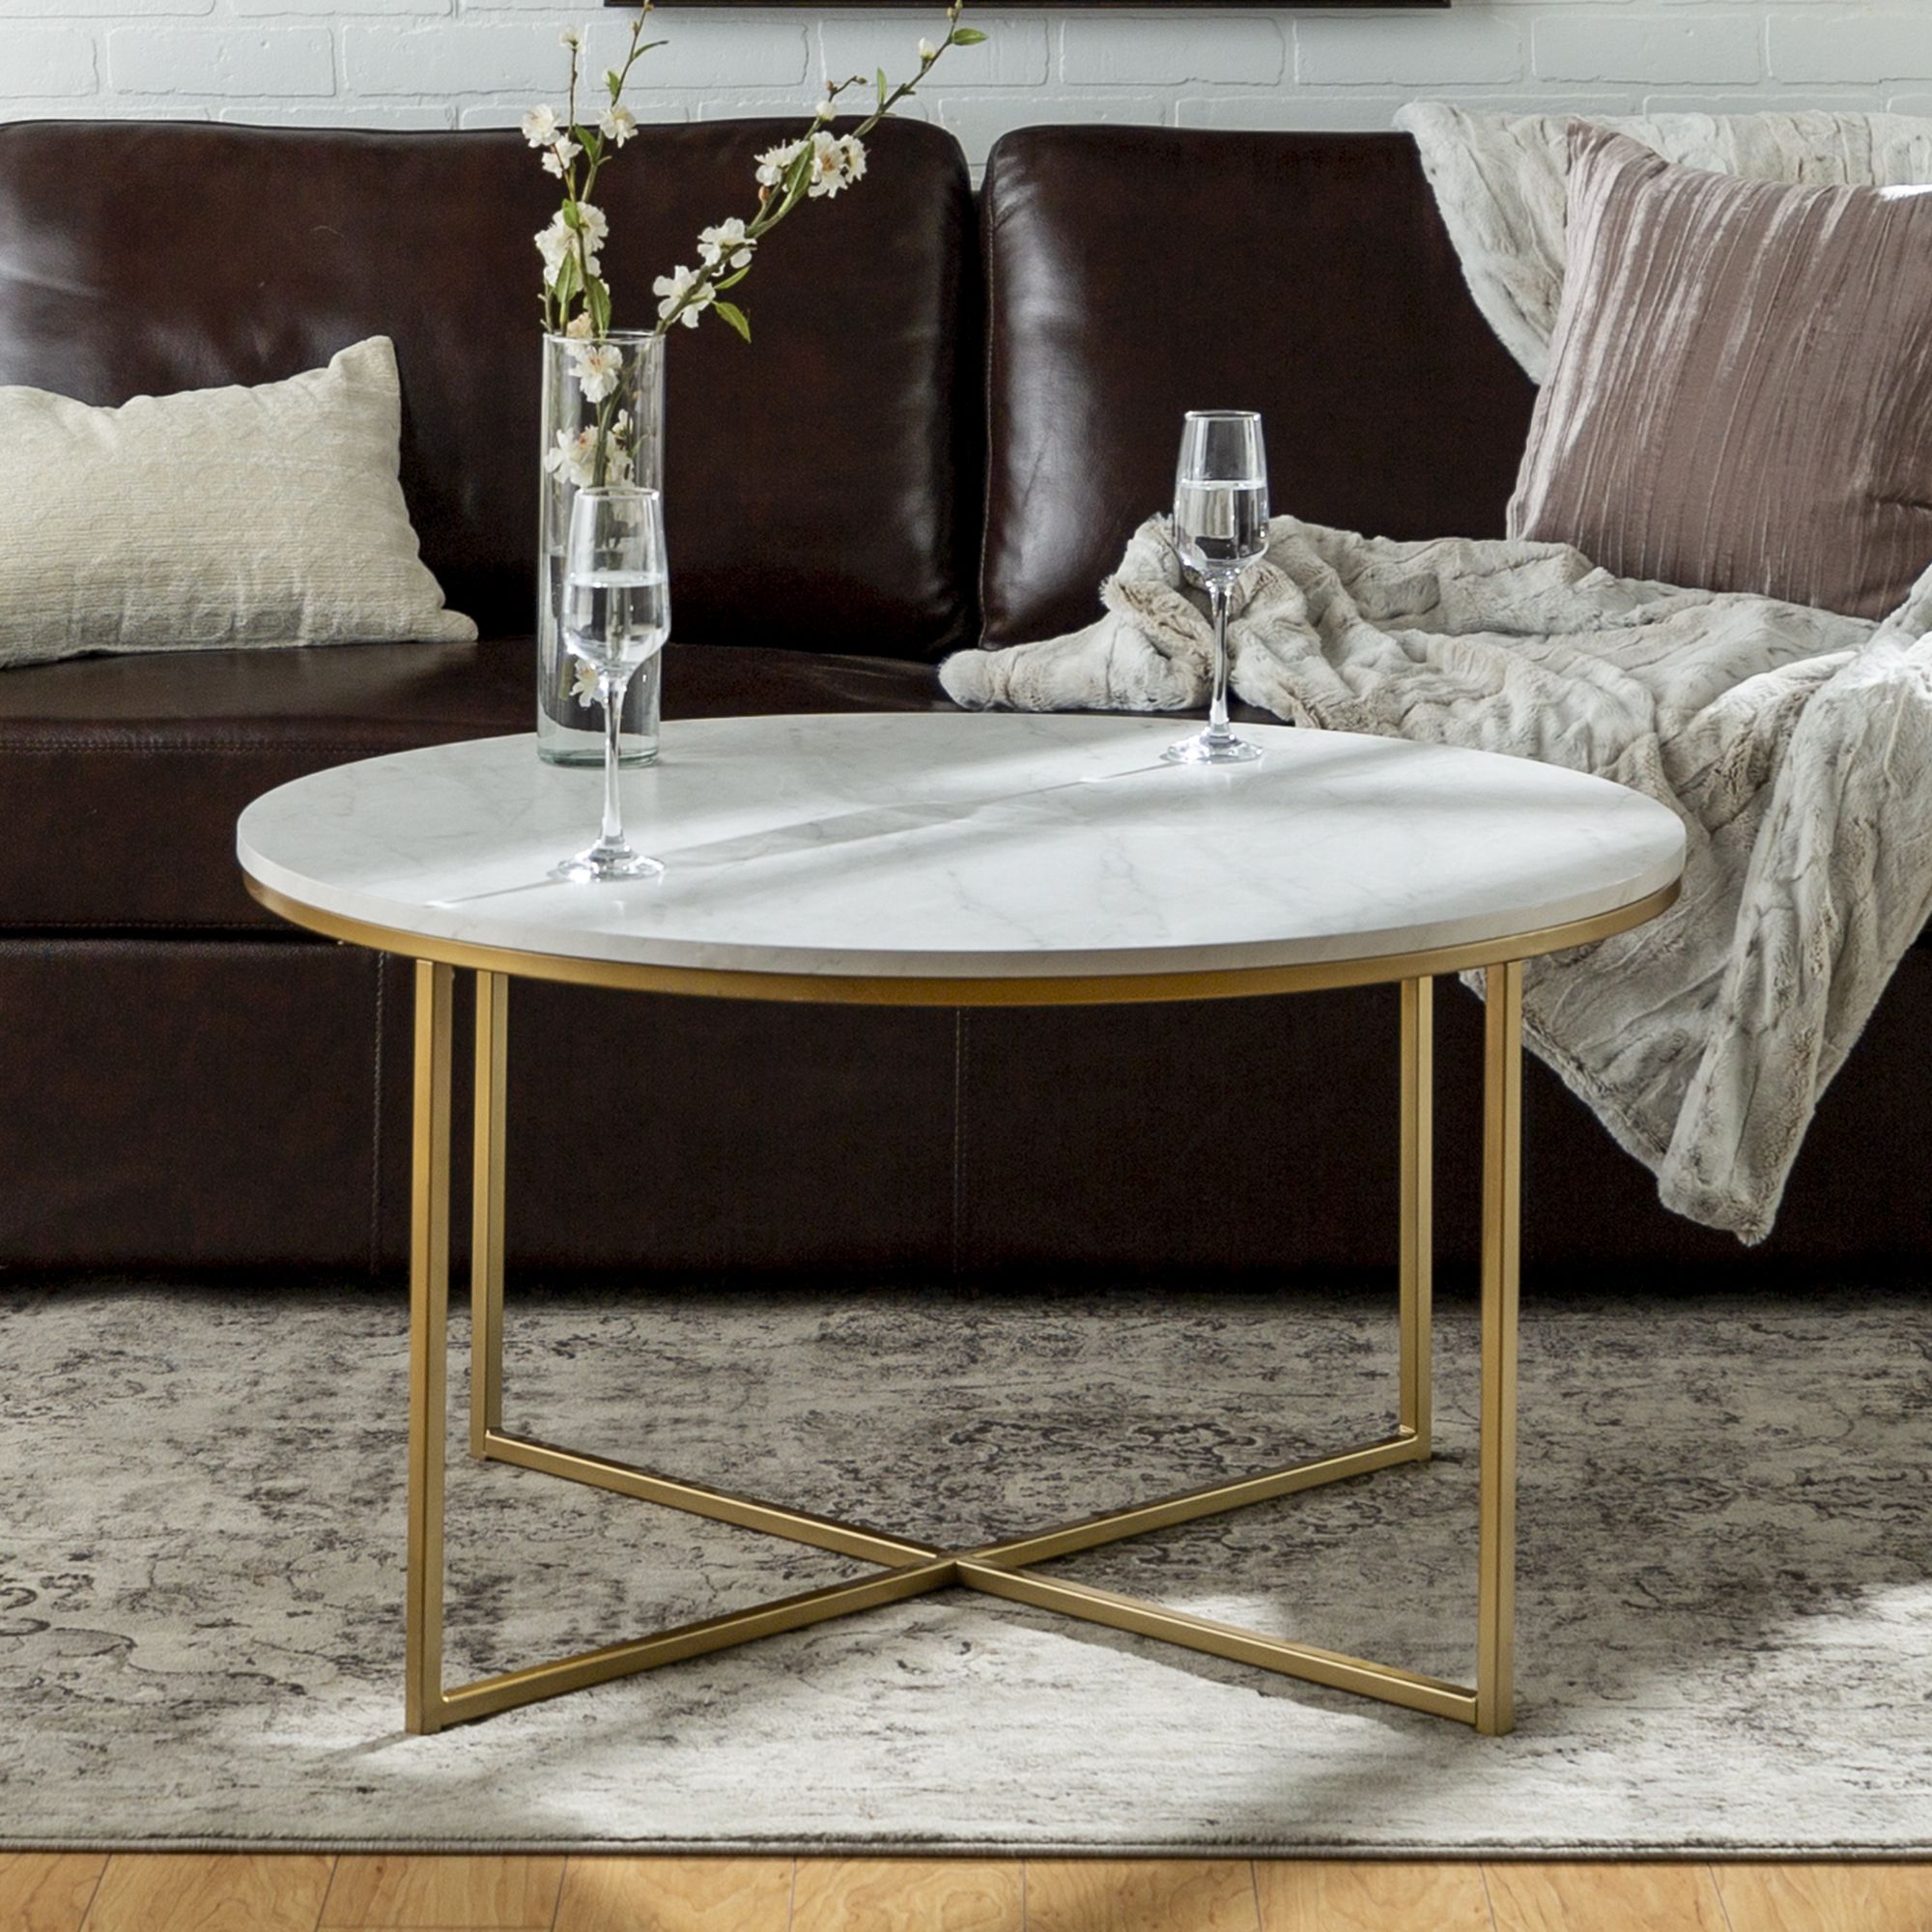 Ember Interiors Modern Round Coffee Table, Faux White Marble/gold –  Walmart Intended For Faux Marble Gold Coffee Tables (View 3 of 20)